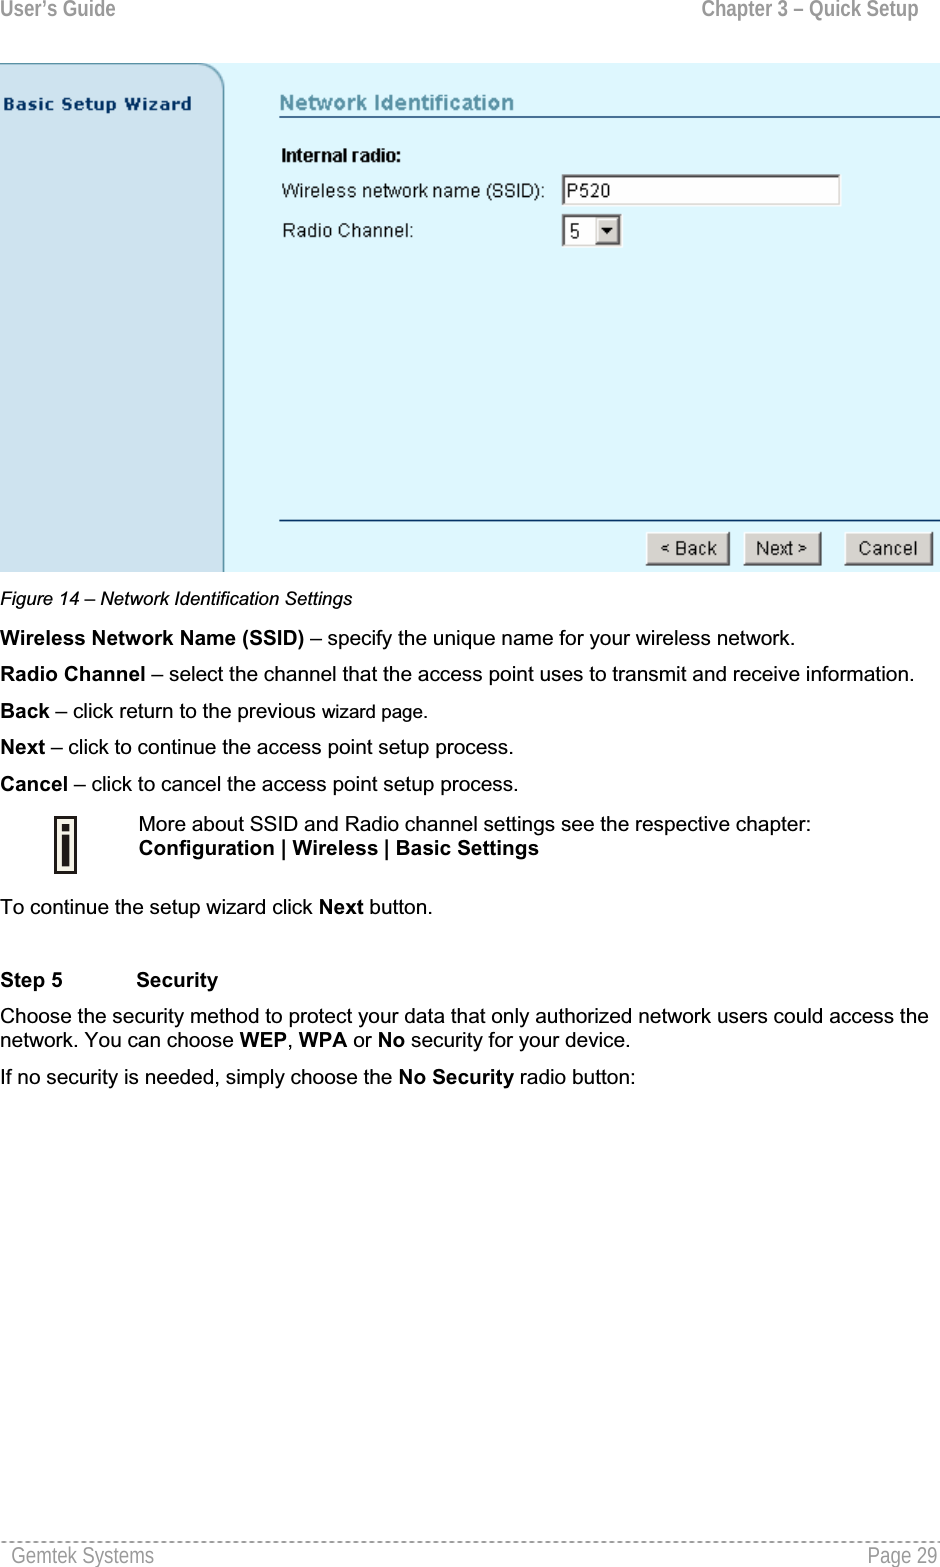 User’s Guide  Chapter 3 – Quick SetupFigure 14 – Network Identification Settings Wireless Network Name (SSID) – specify the unique name for your wireless network.Radio Channel – select the channel that the access point uses to transmit and receive information. Back – click return to the previous wizard page. Next – click to continue the access point setup process.Cancel – click to cancel the access point setup process.More about SSID and Radio channel settings see the respective chapter:Configuration | Wireless | Basic SettingsTo continue the setup wizard click Next button. Step 5 SecurityChoose the security method to protect your data that only authorized network users could access the network. You can choose WEP,WPA or No security for your device.If no security is needed, simply choose the No Security radio button: Gemtek Systems  Page 29